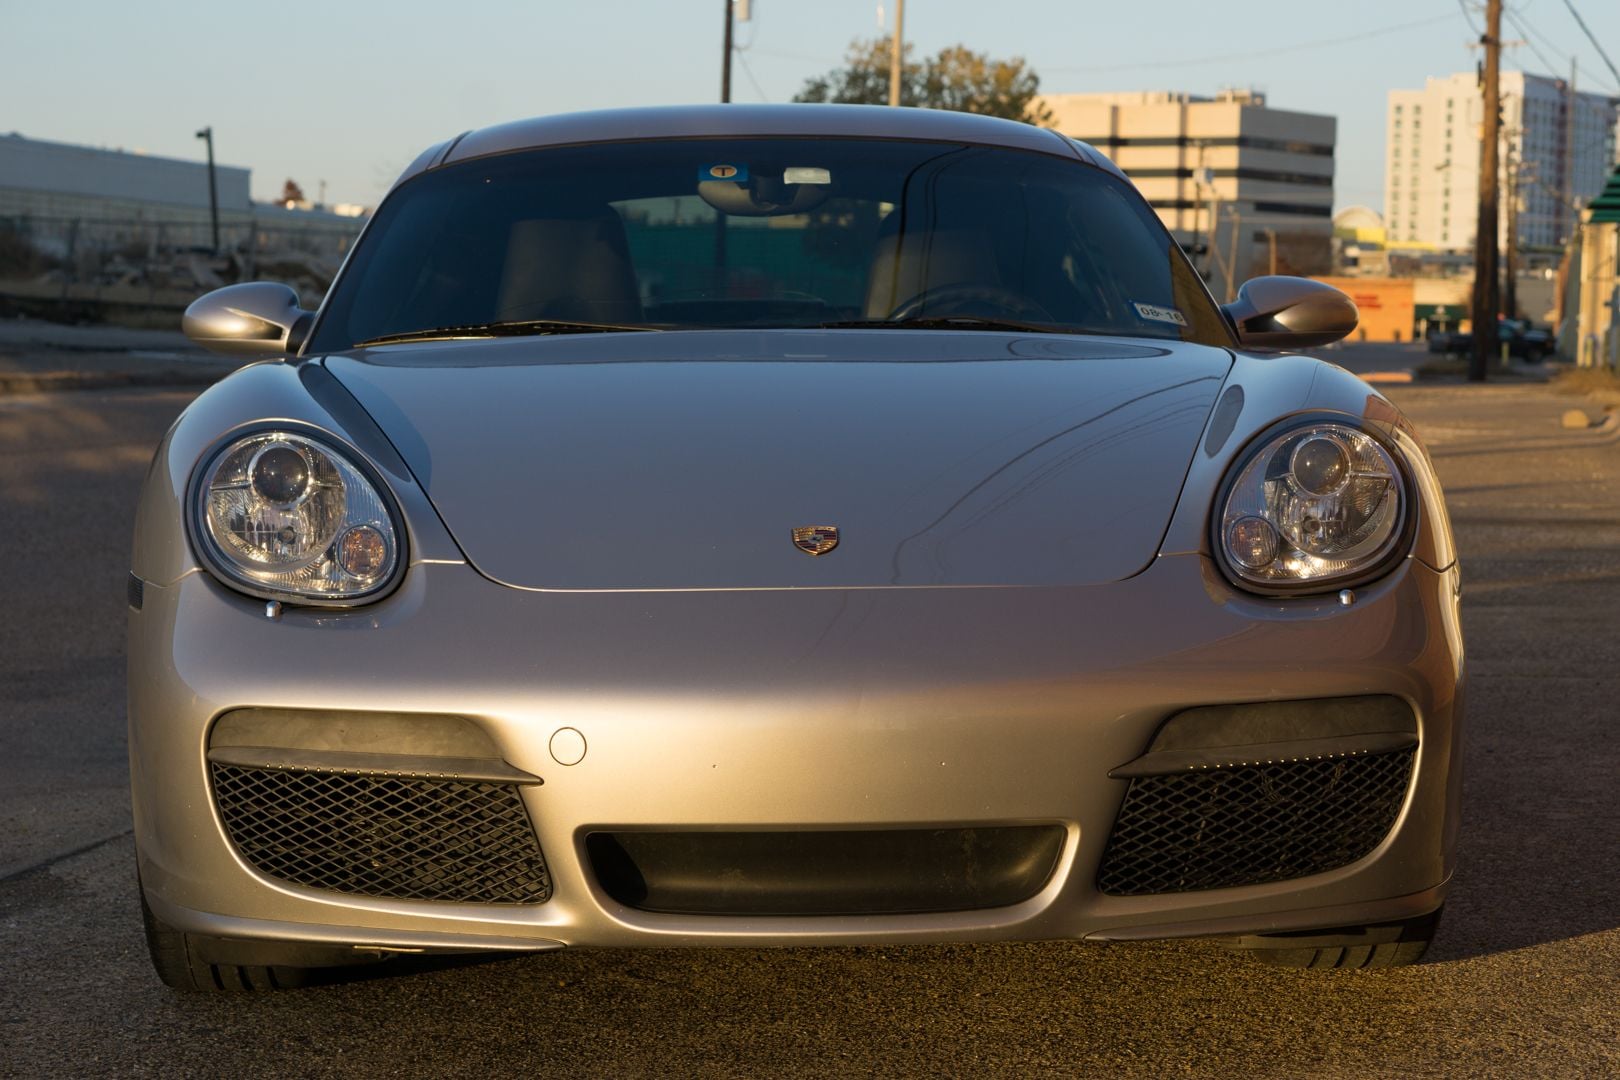 2006 Porsche Cayman - Saying Goodbye to my Porsche 987.1S Cayman S - Sport Chrono Package & Much More! - Used - VIN WP0AB298X6U782800 - 68,999 Miles - 6 cyl - 2WD - Manual - Coupe - Silver - Dallas, TX 75235, United States